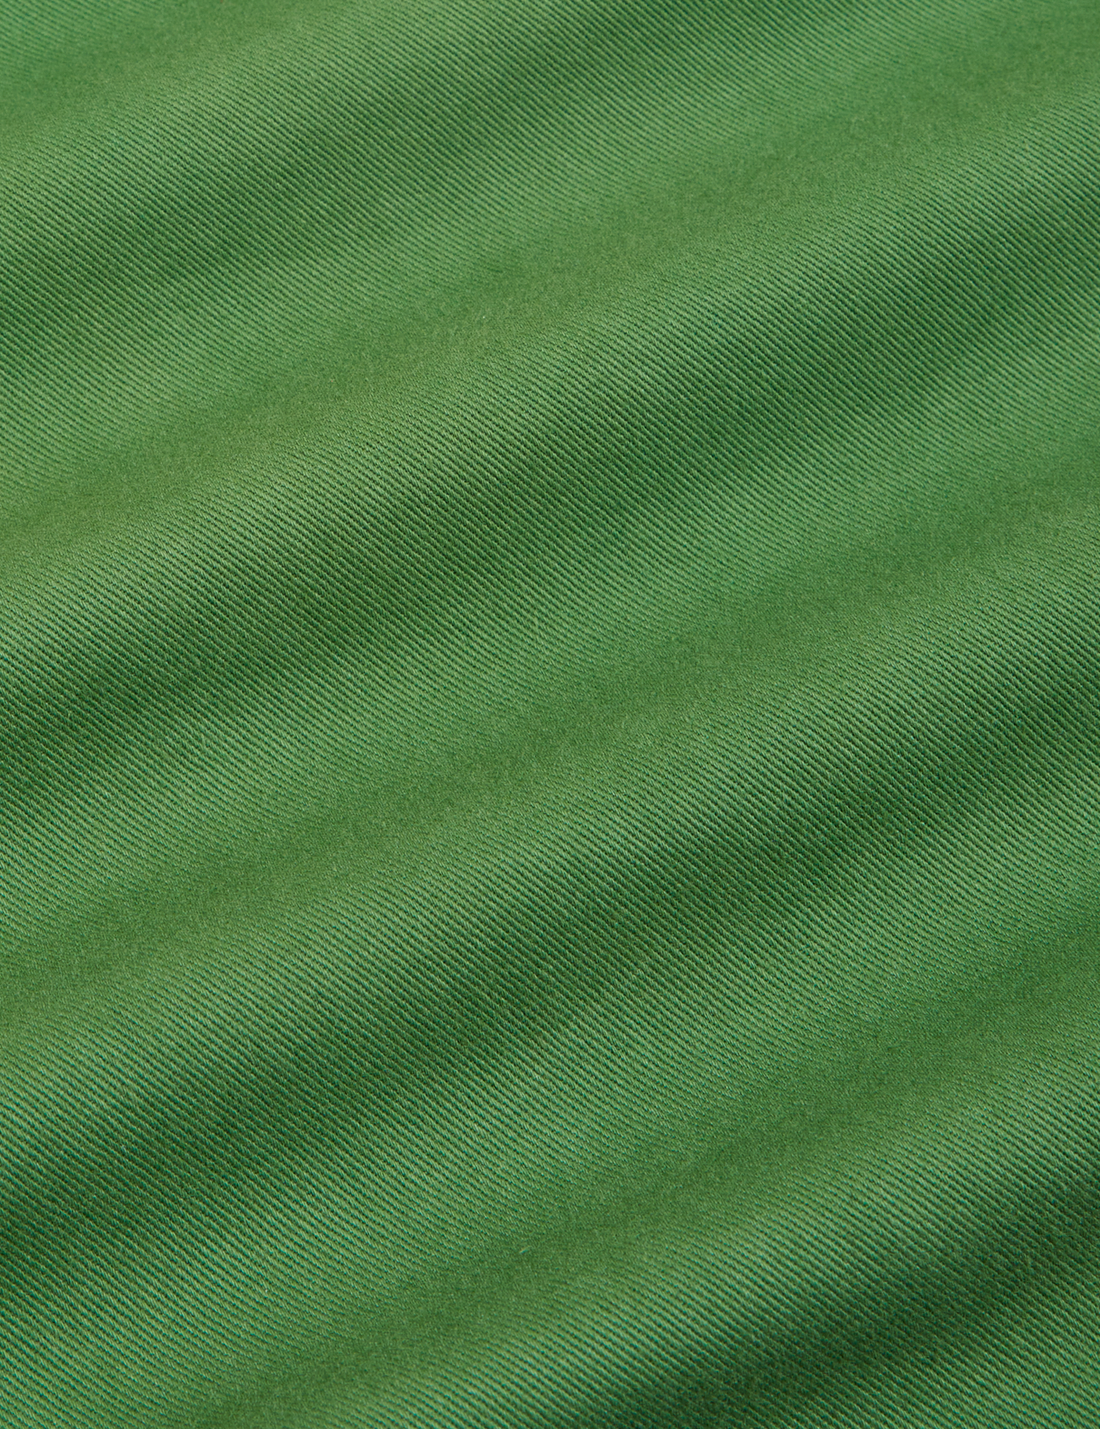 Oversize Overshirt in Lawn Green fabric detail close up